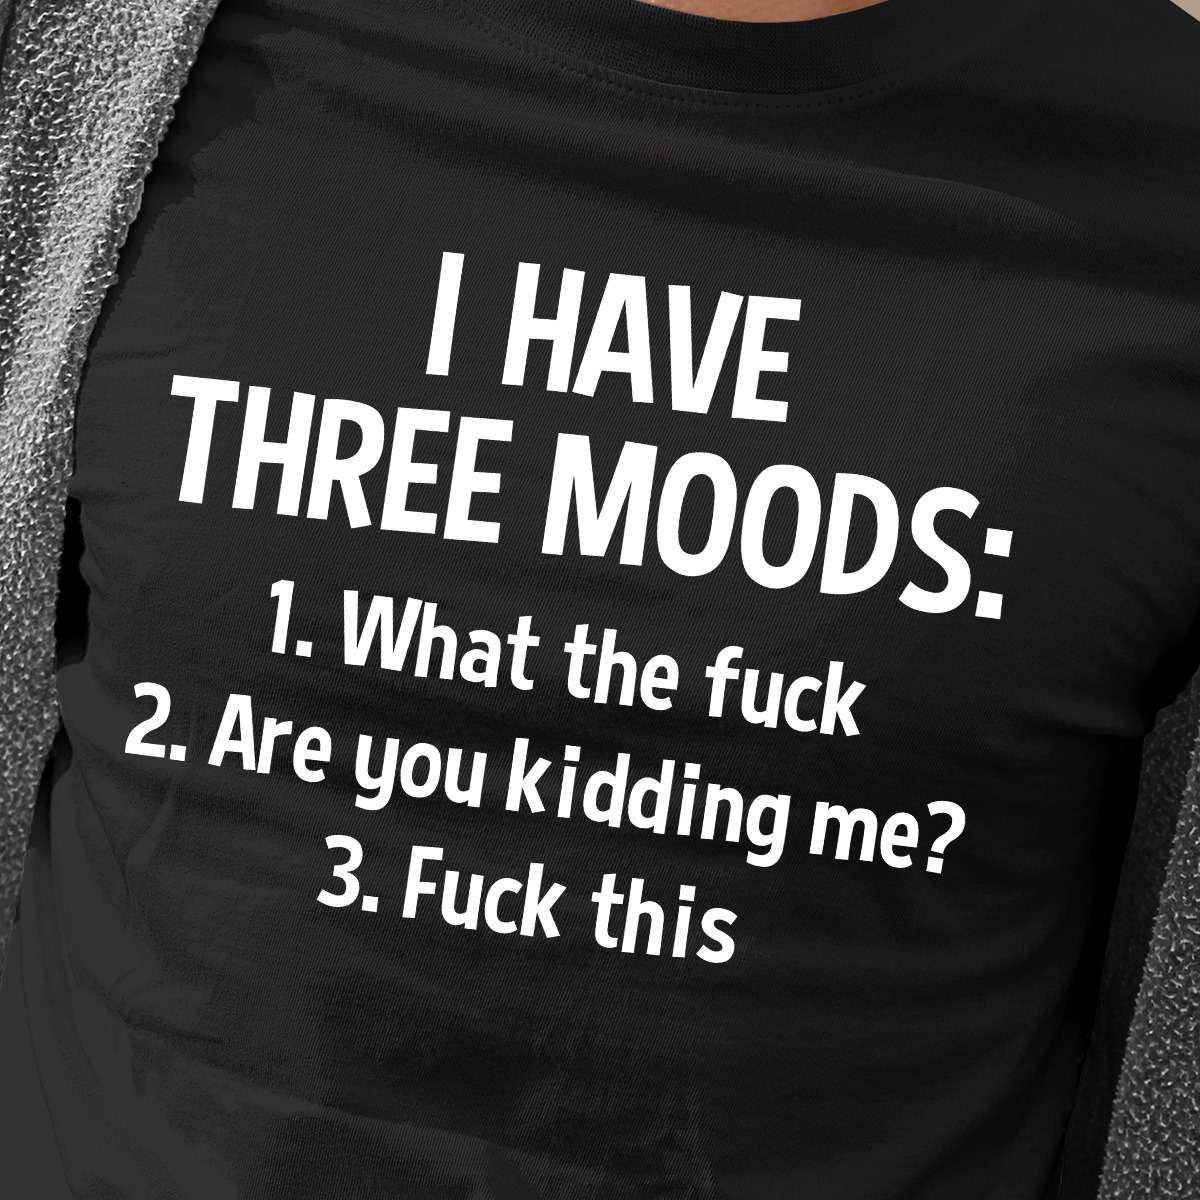 I have three moods what the fuck, are you kidding me, fuck this - Human personality